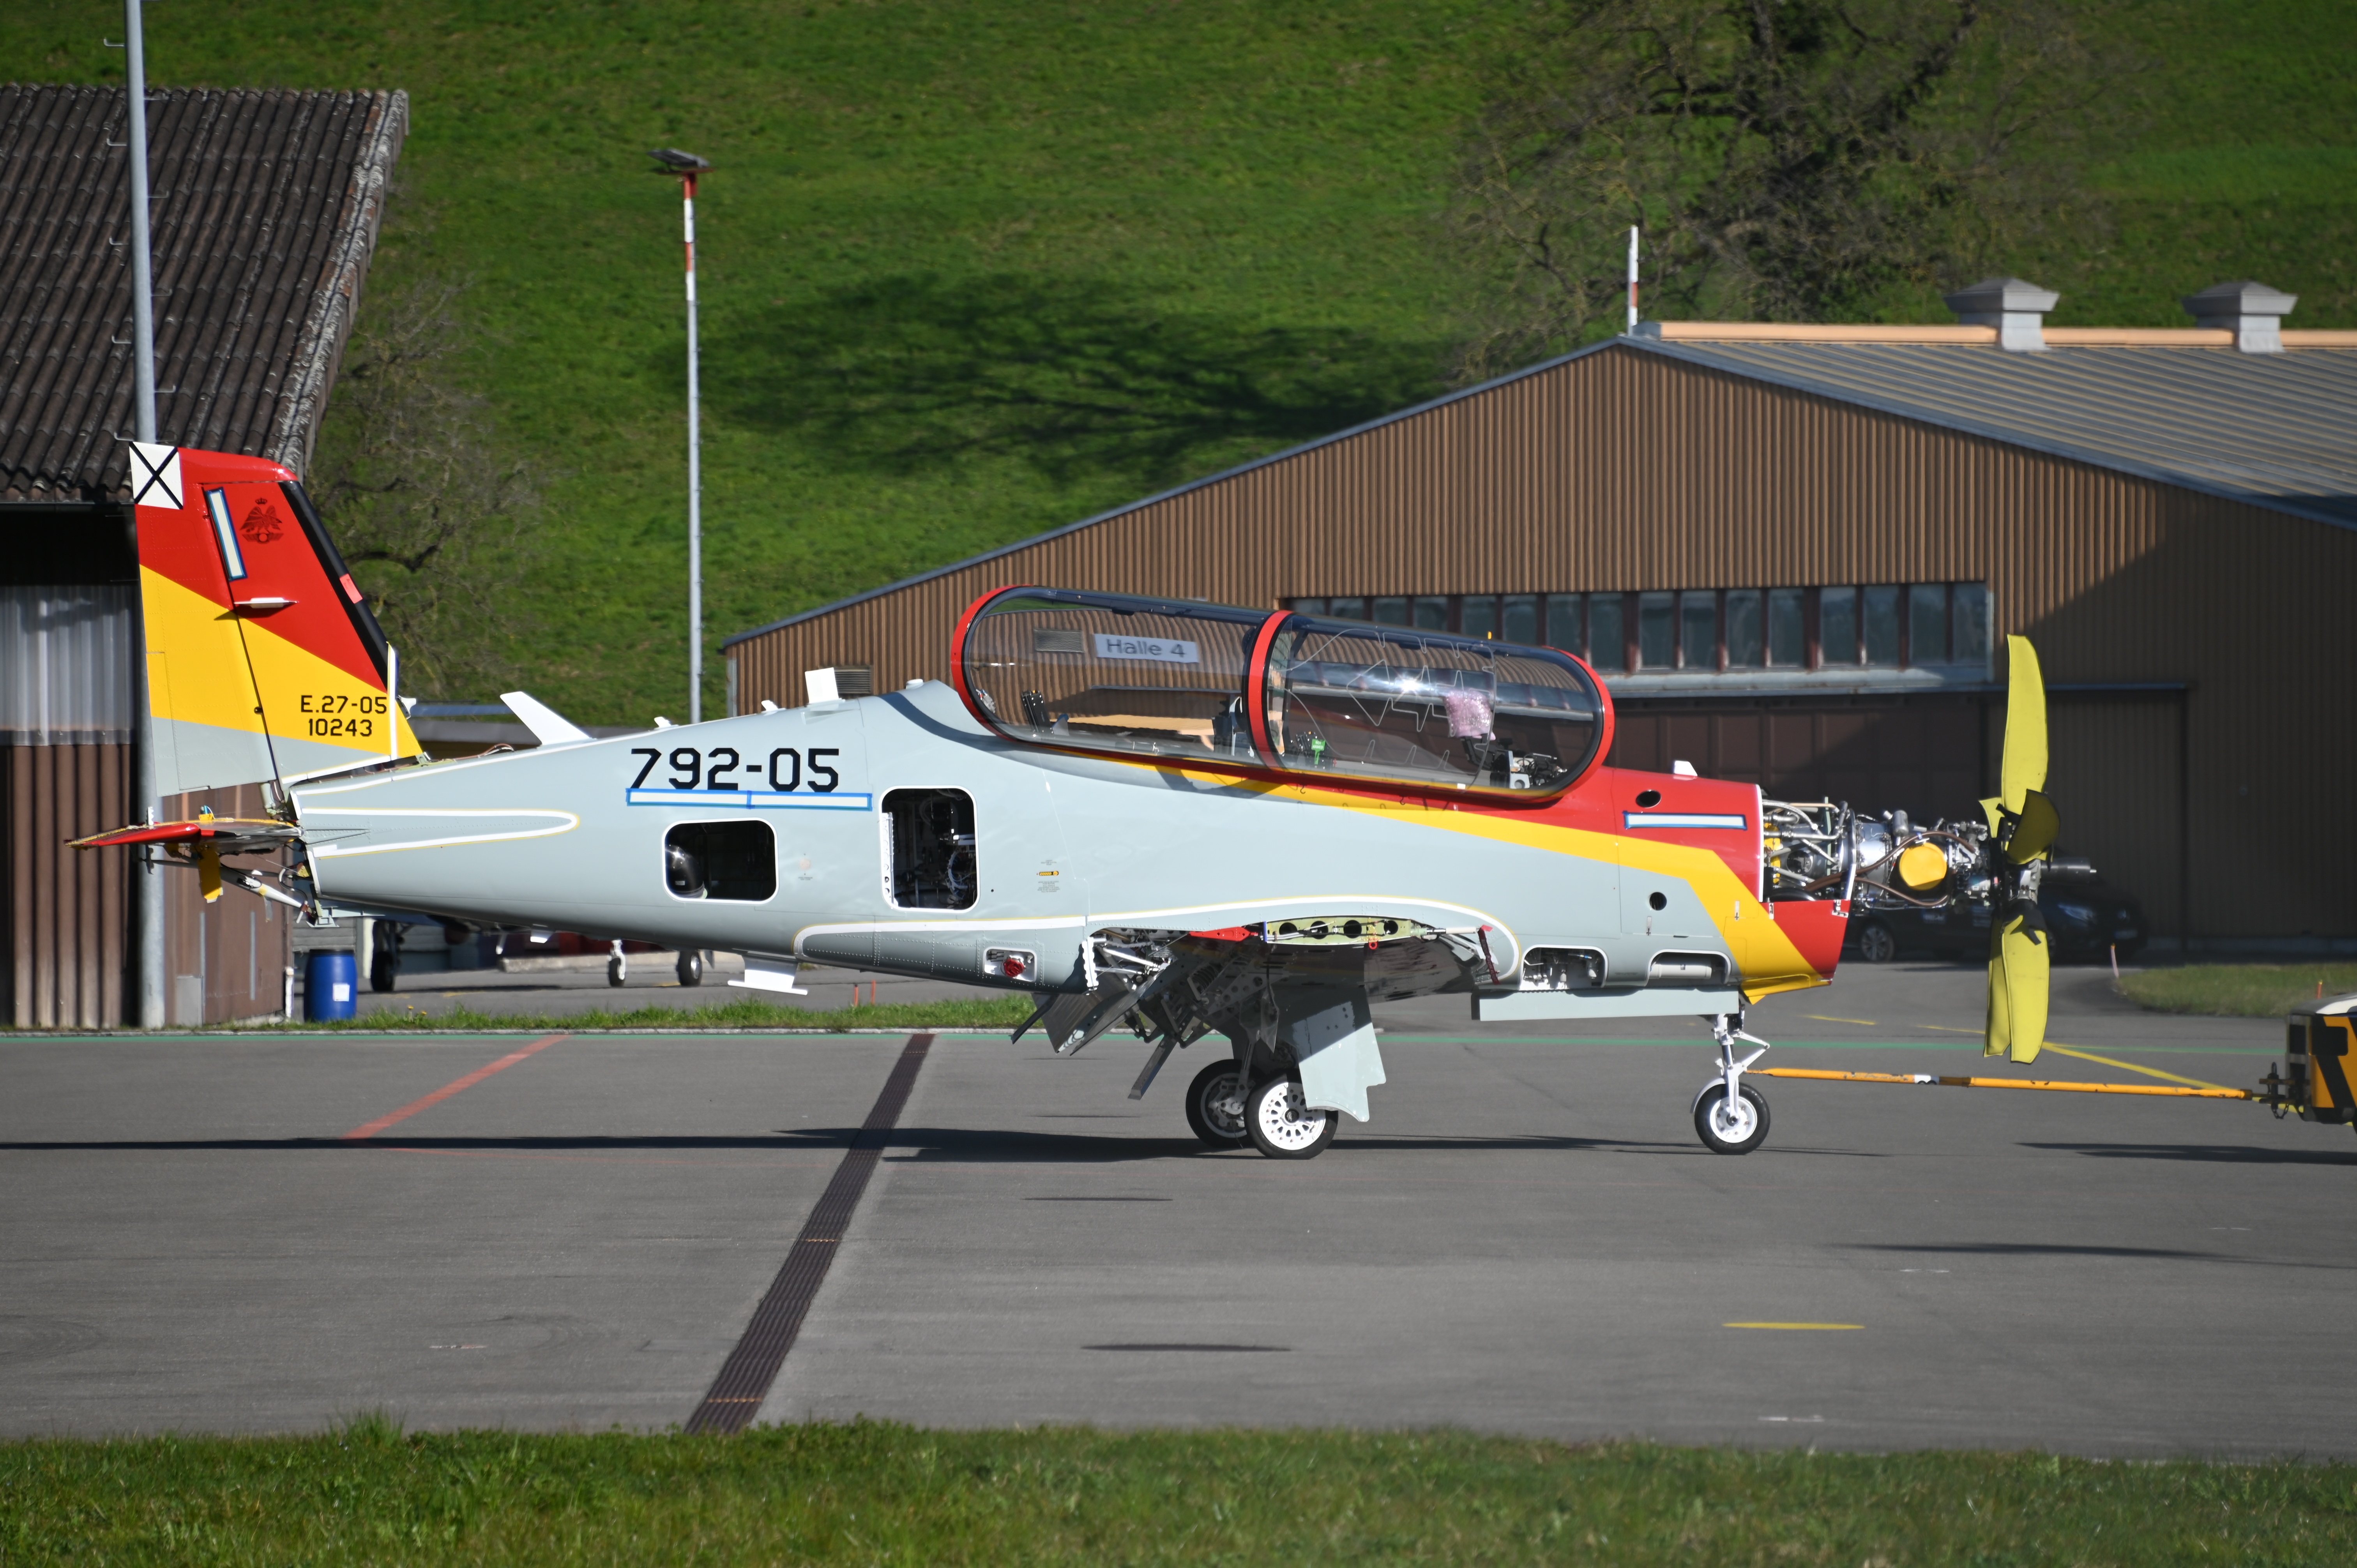 Fifth Spanish Air Force PC-21 sighted